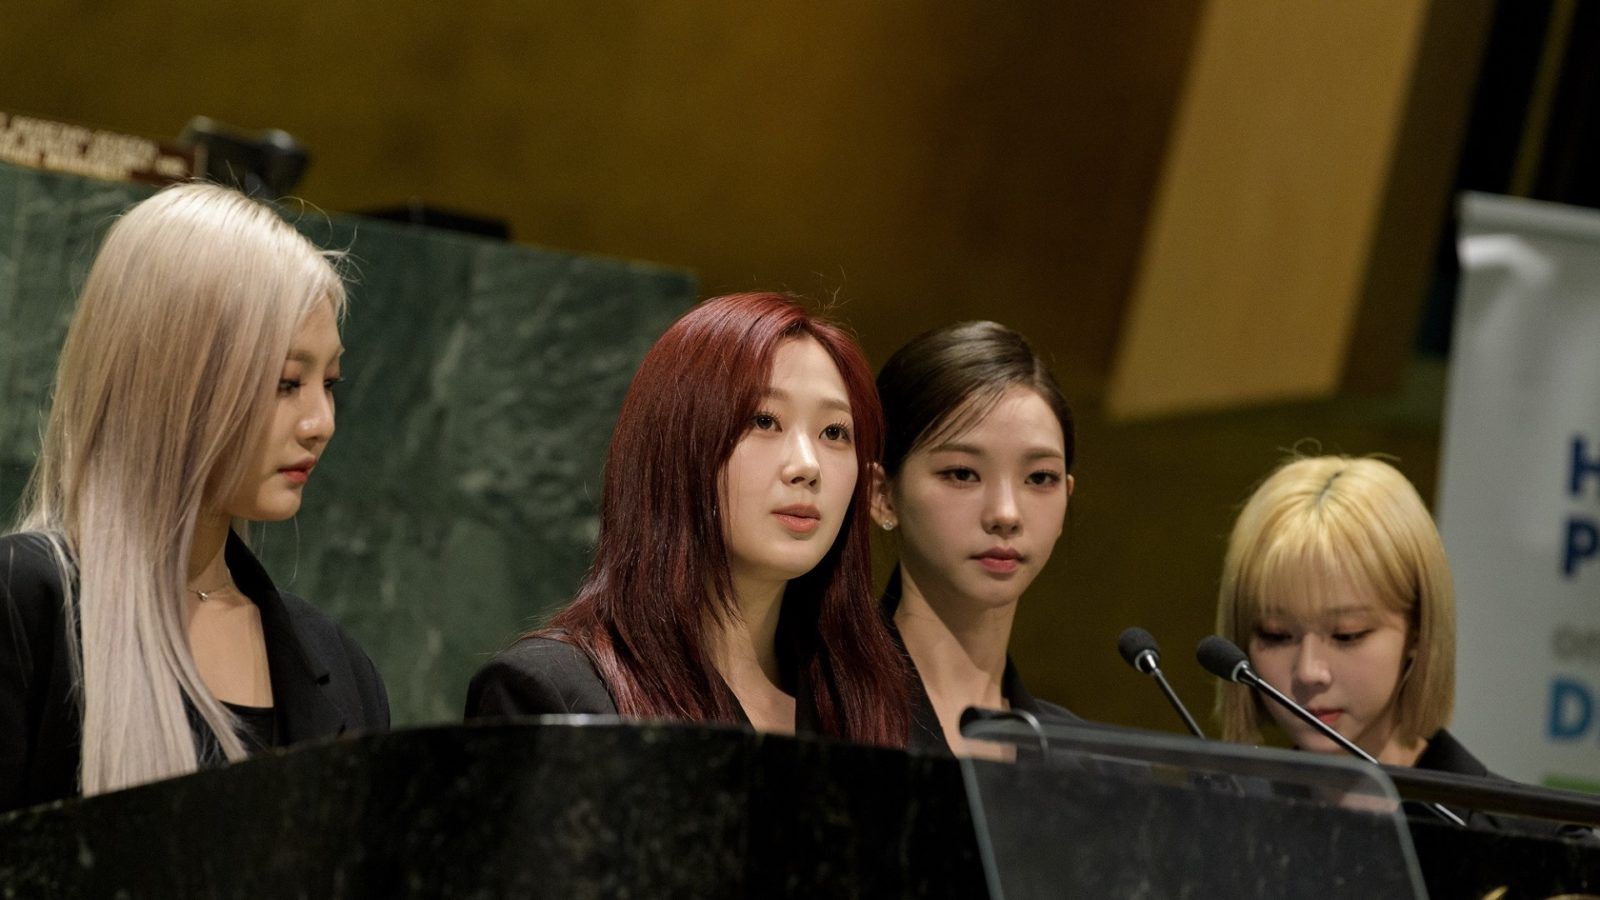 K-pop group aespa speaks on sustainable development and the metaverse at the UN